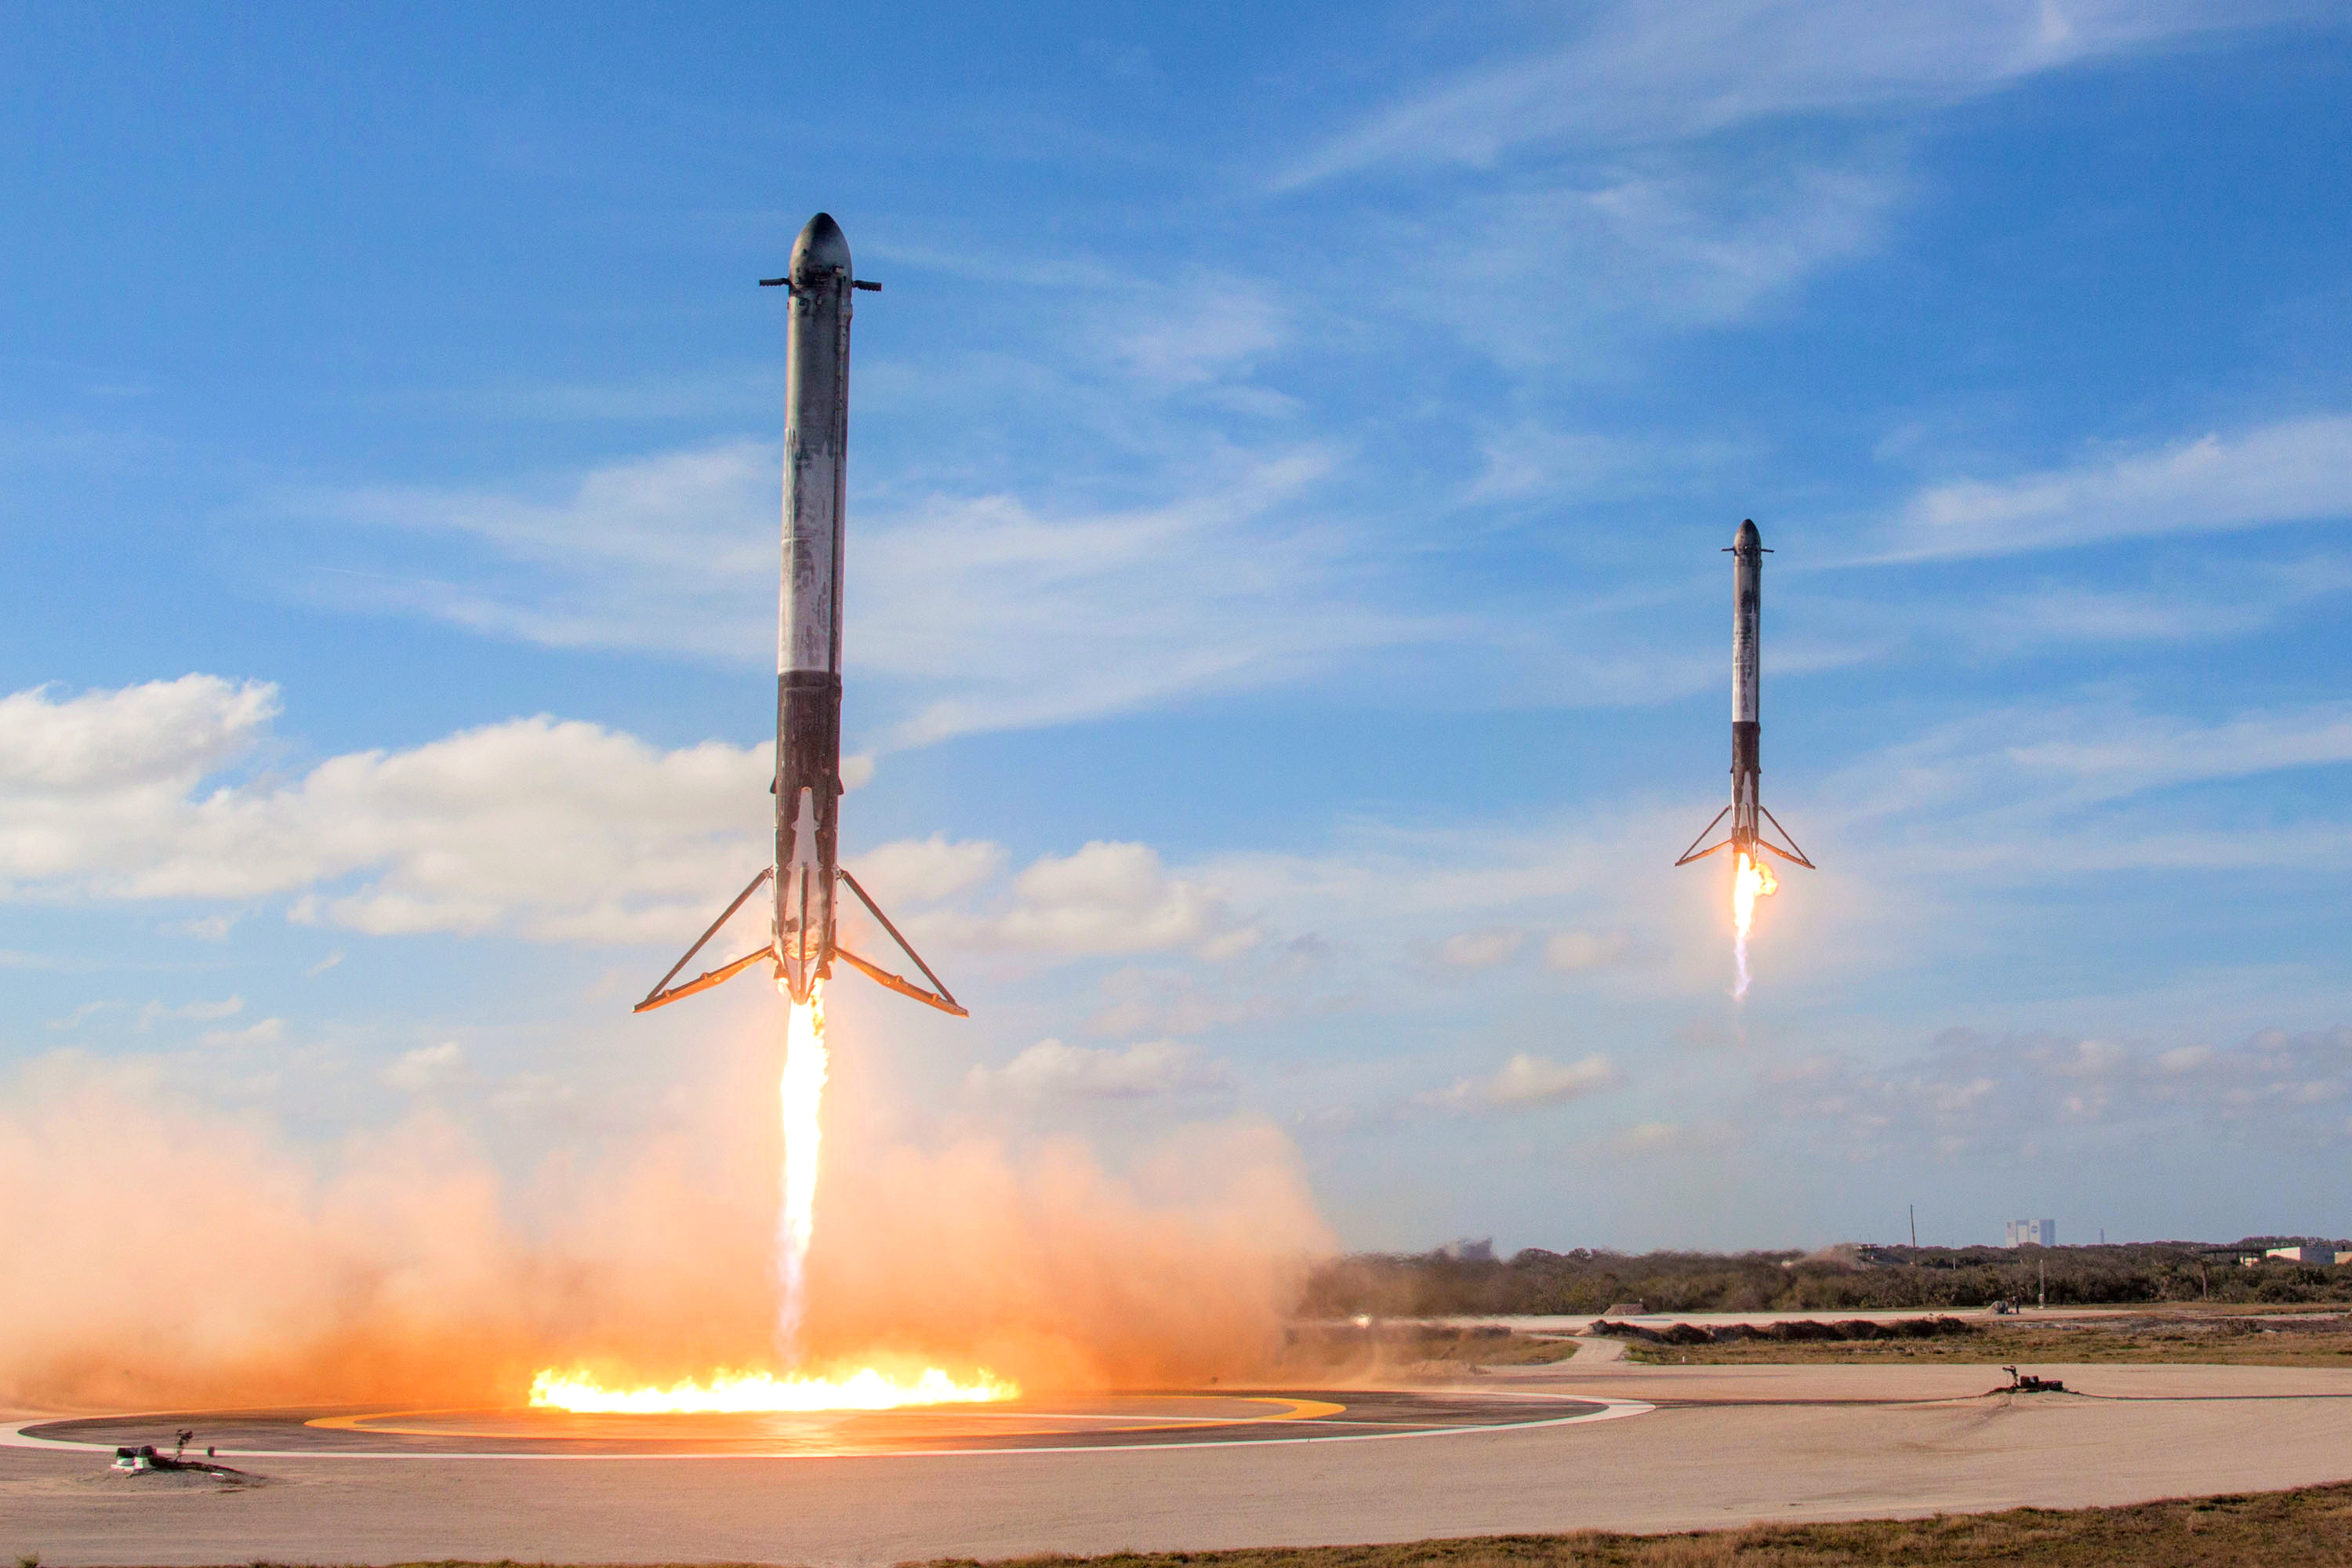 Two booster from the Falcon Heavy landing themselves back on earth  via "autopilot" a first for the world of space travel.